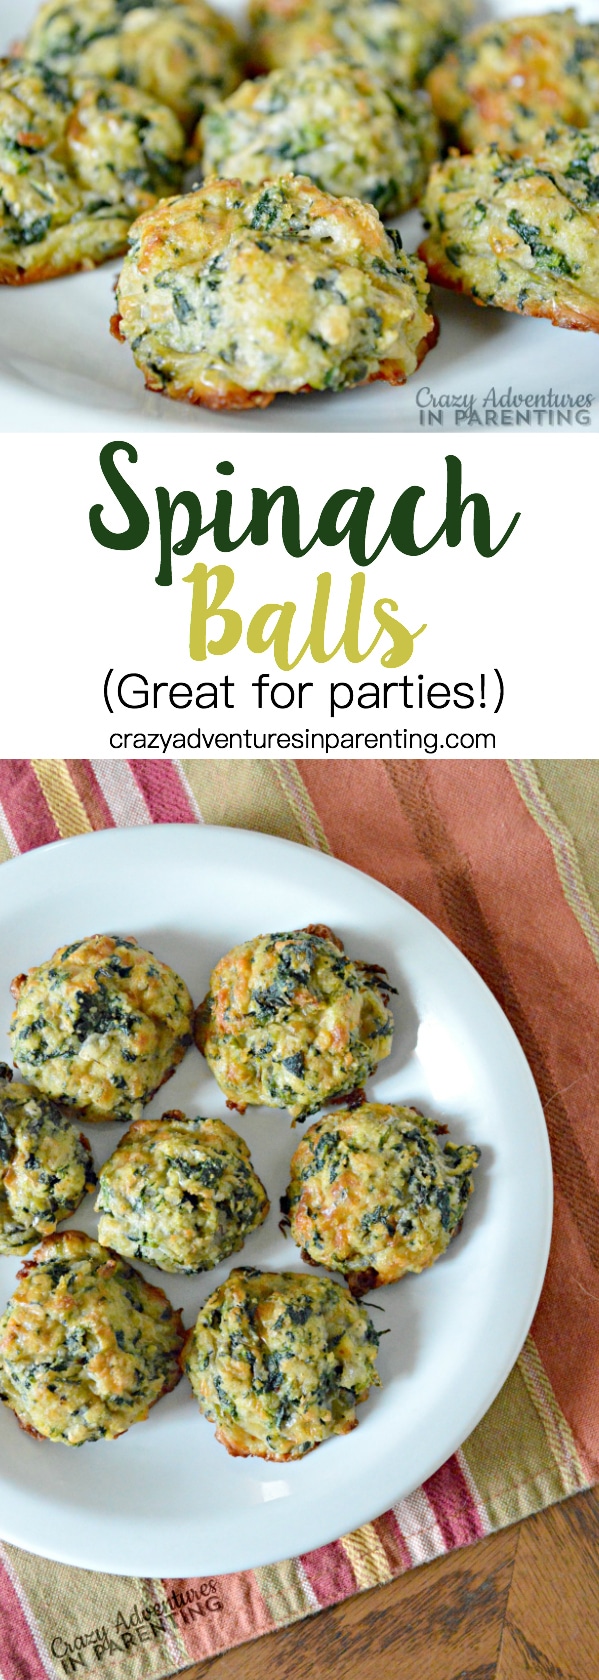 Spinach Balls recipe - great for parties and entertaining!